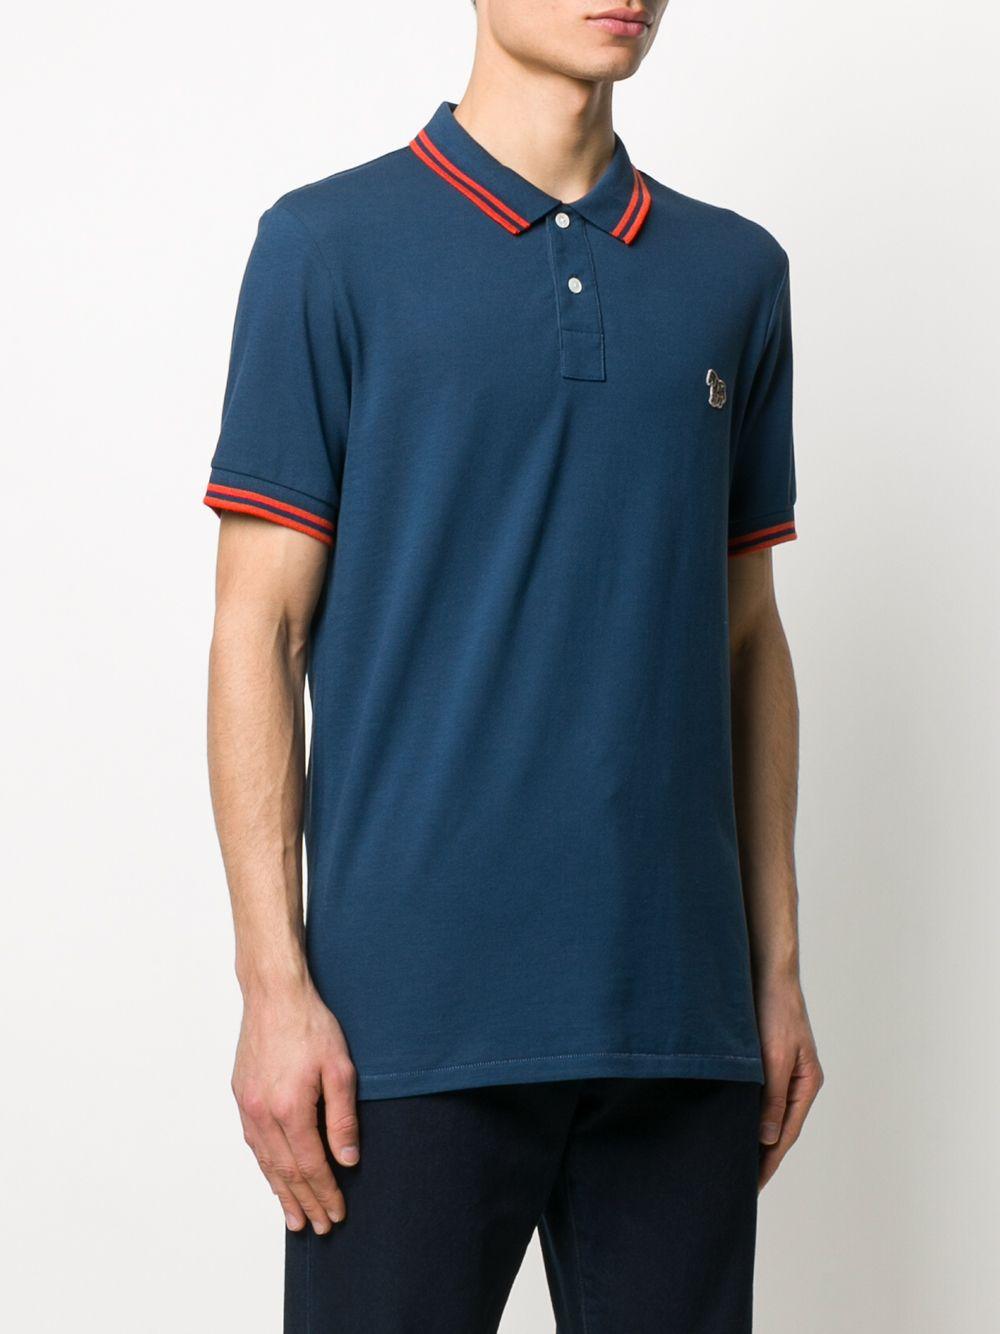 PS by Paul Smith Cotton Stripe Detailed Polo Shirt in Blue for Men - Lyst